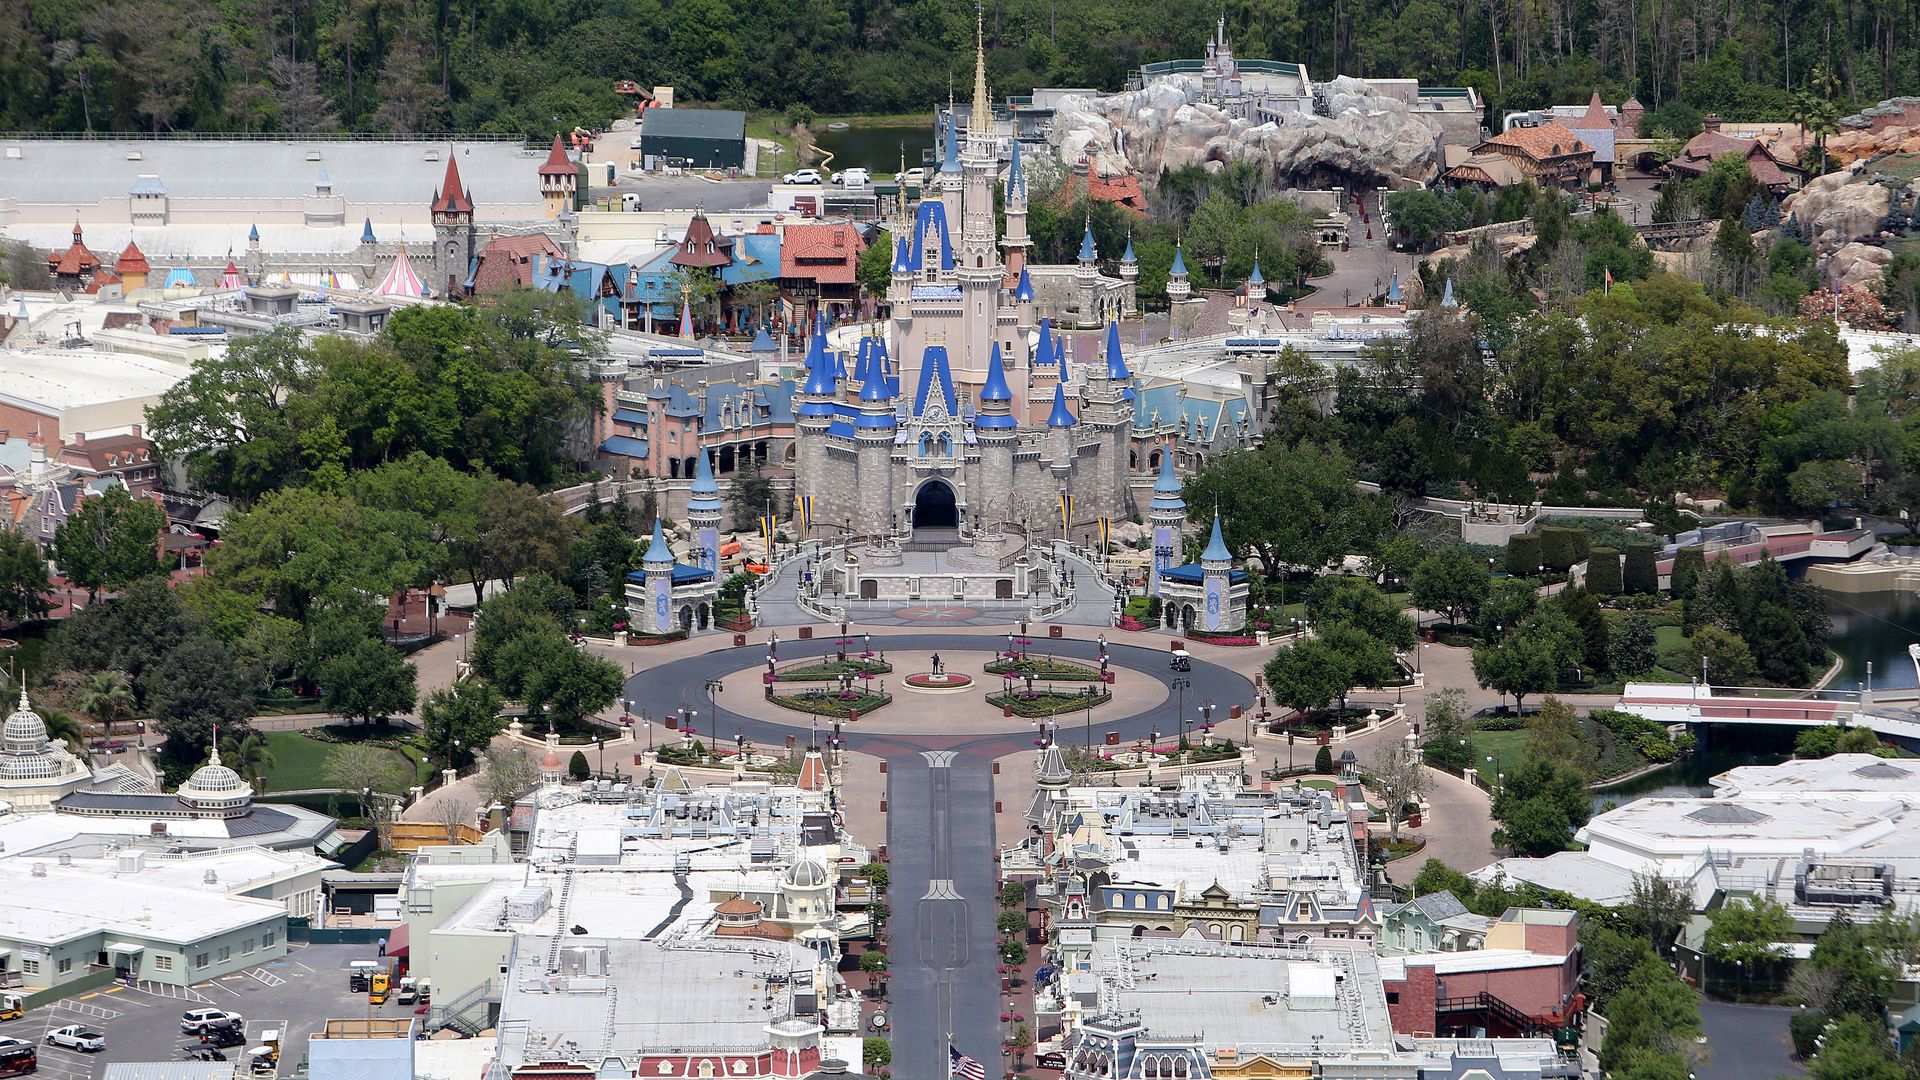 Walt Disney World remains closed to the public due to the Coronavirus threat on March 23